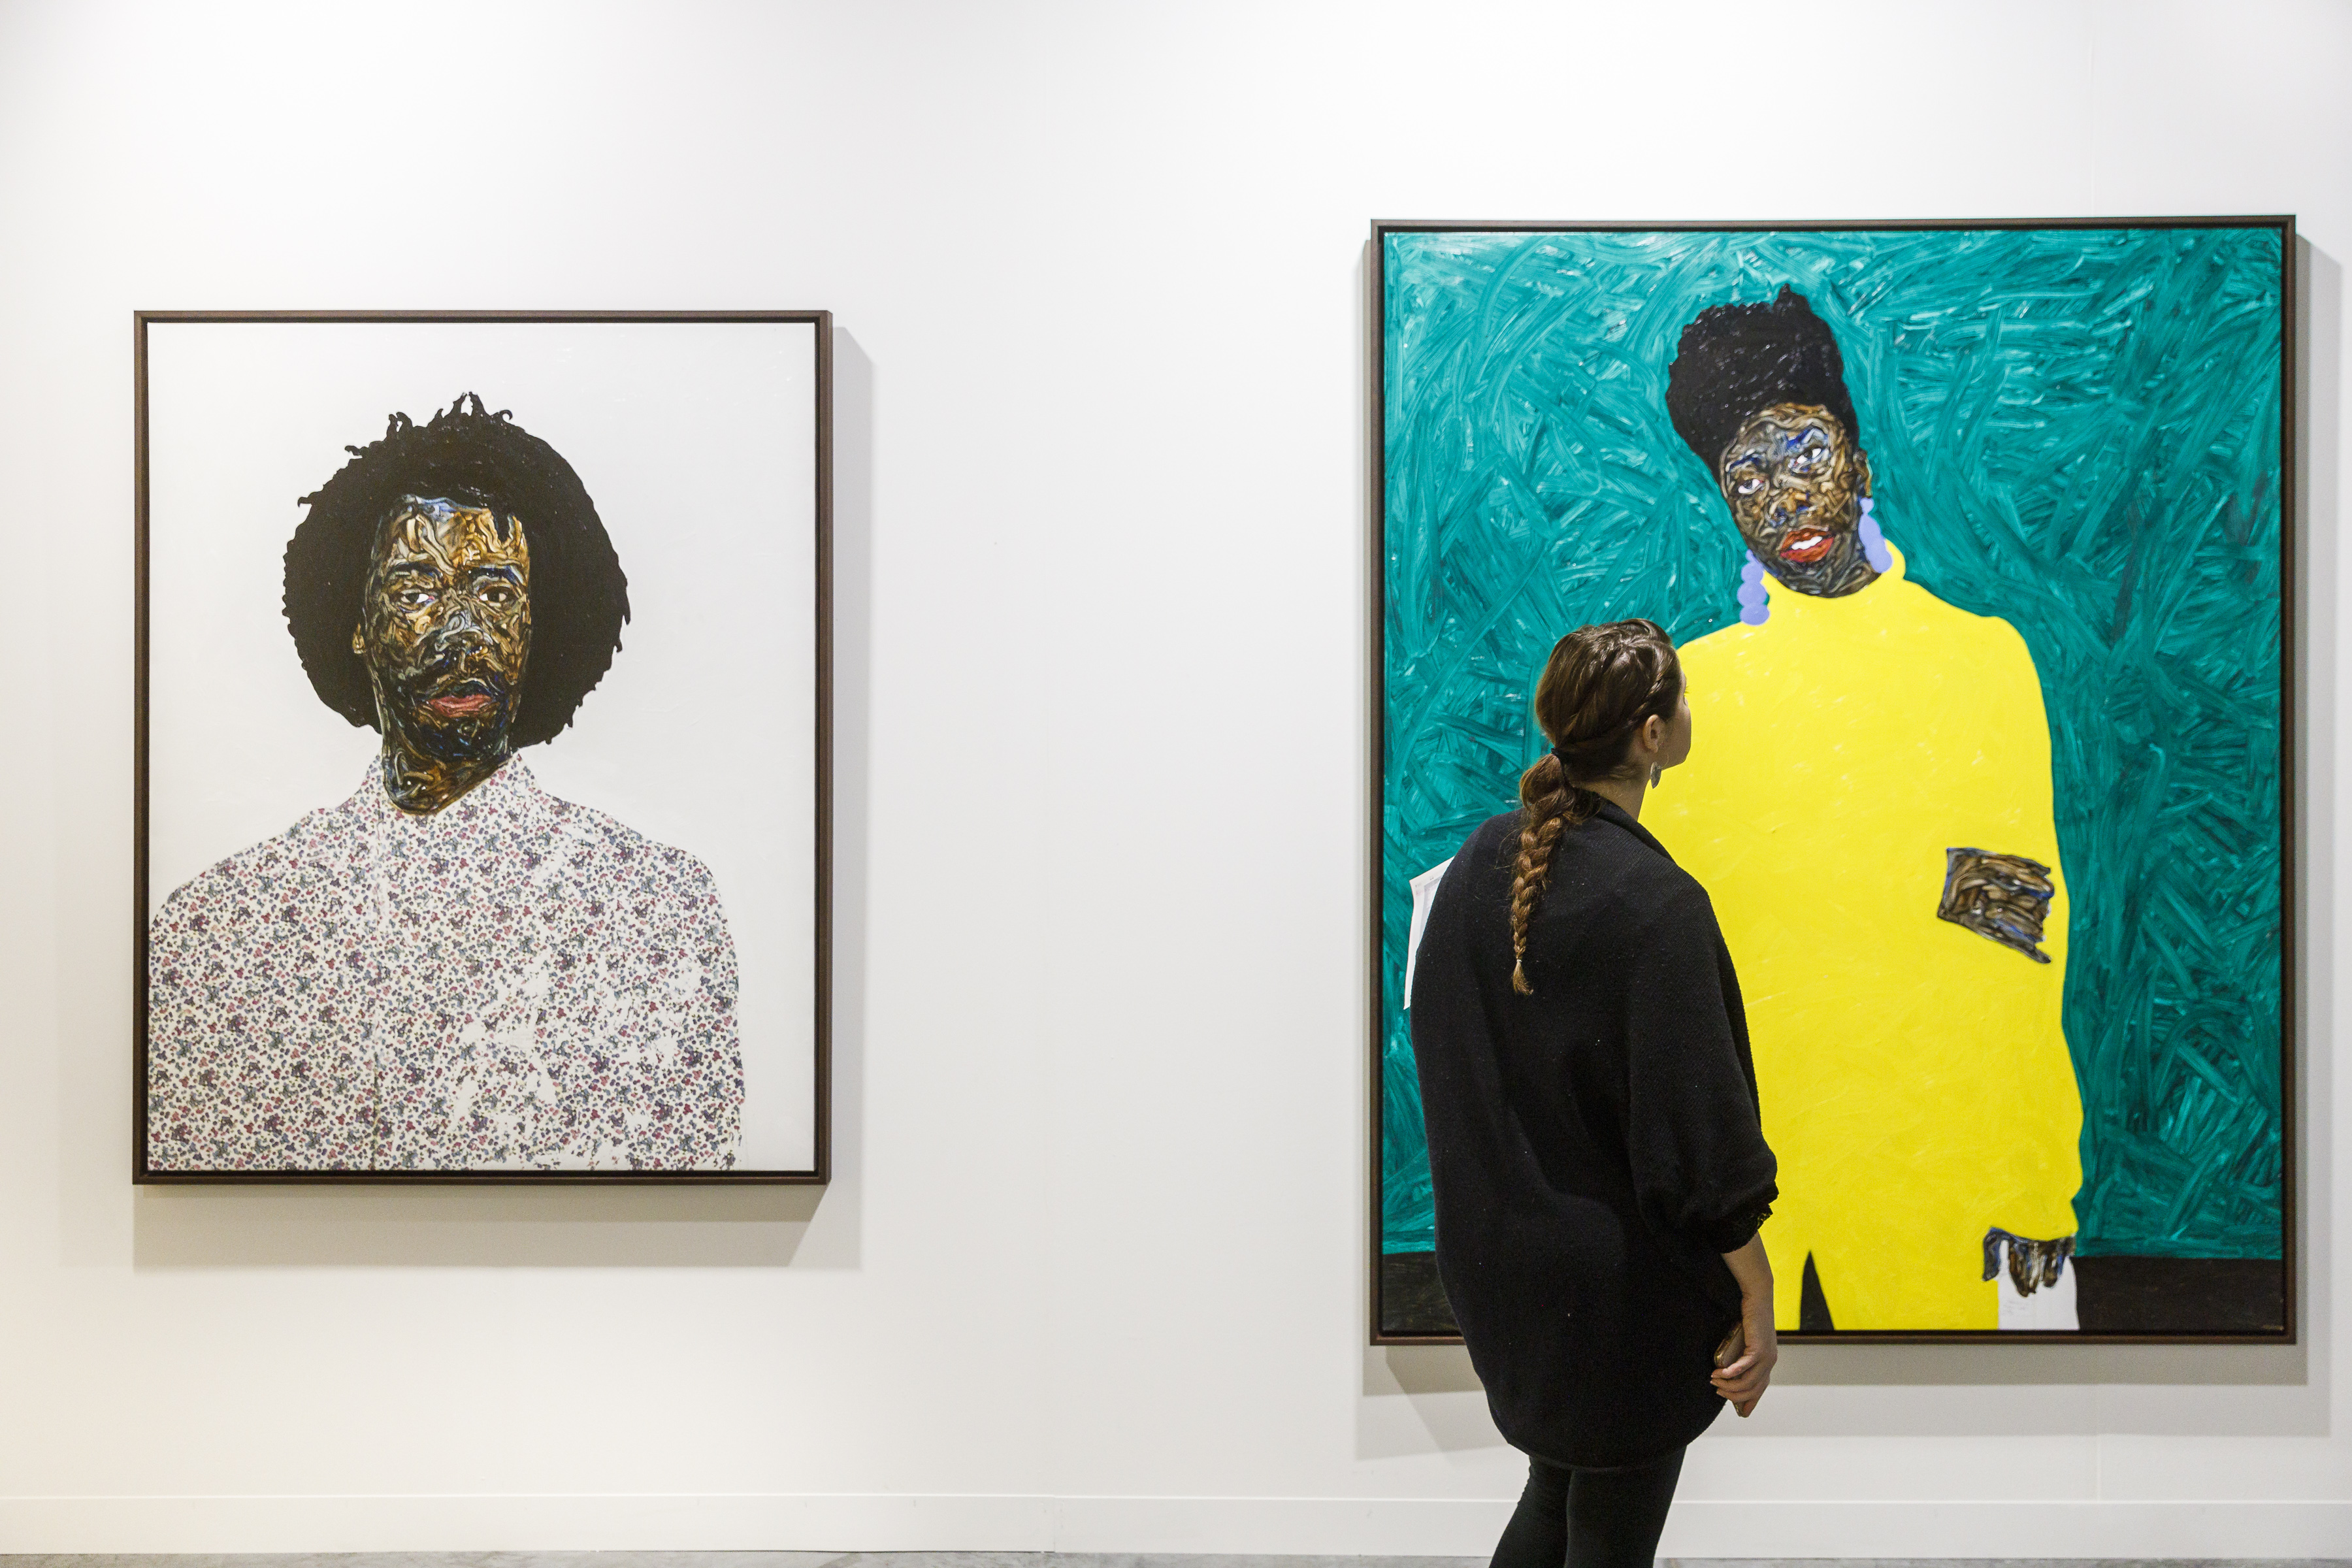 The Gagosian Debuts Hip Hop Inspired Art Show With Collaborative